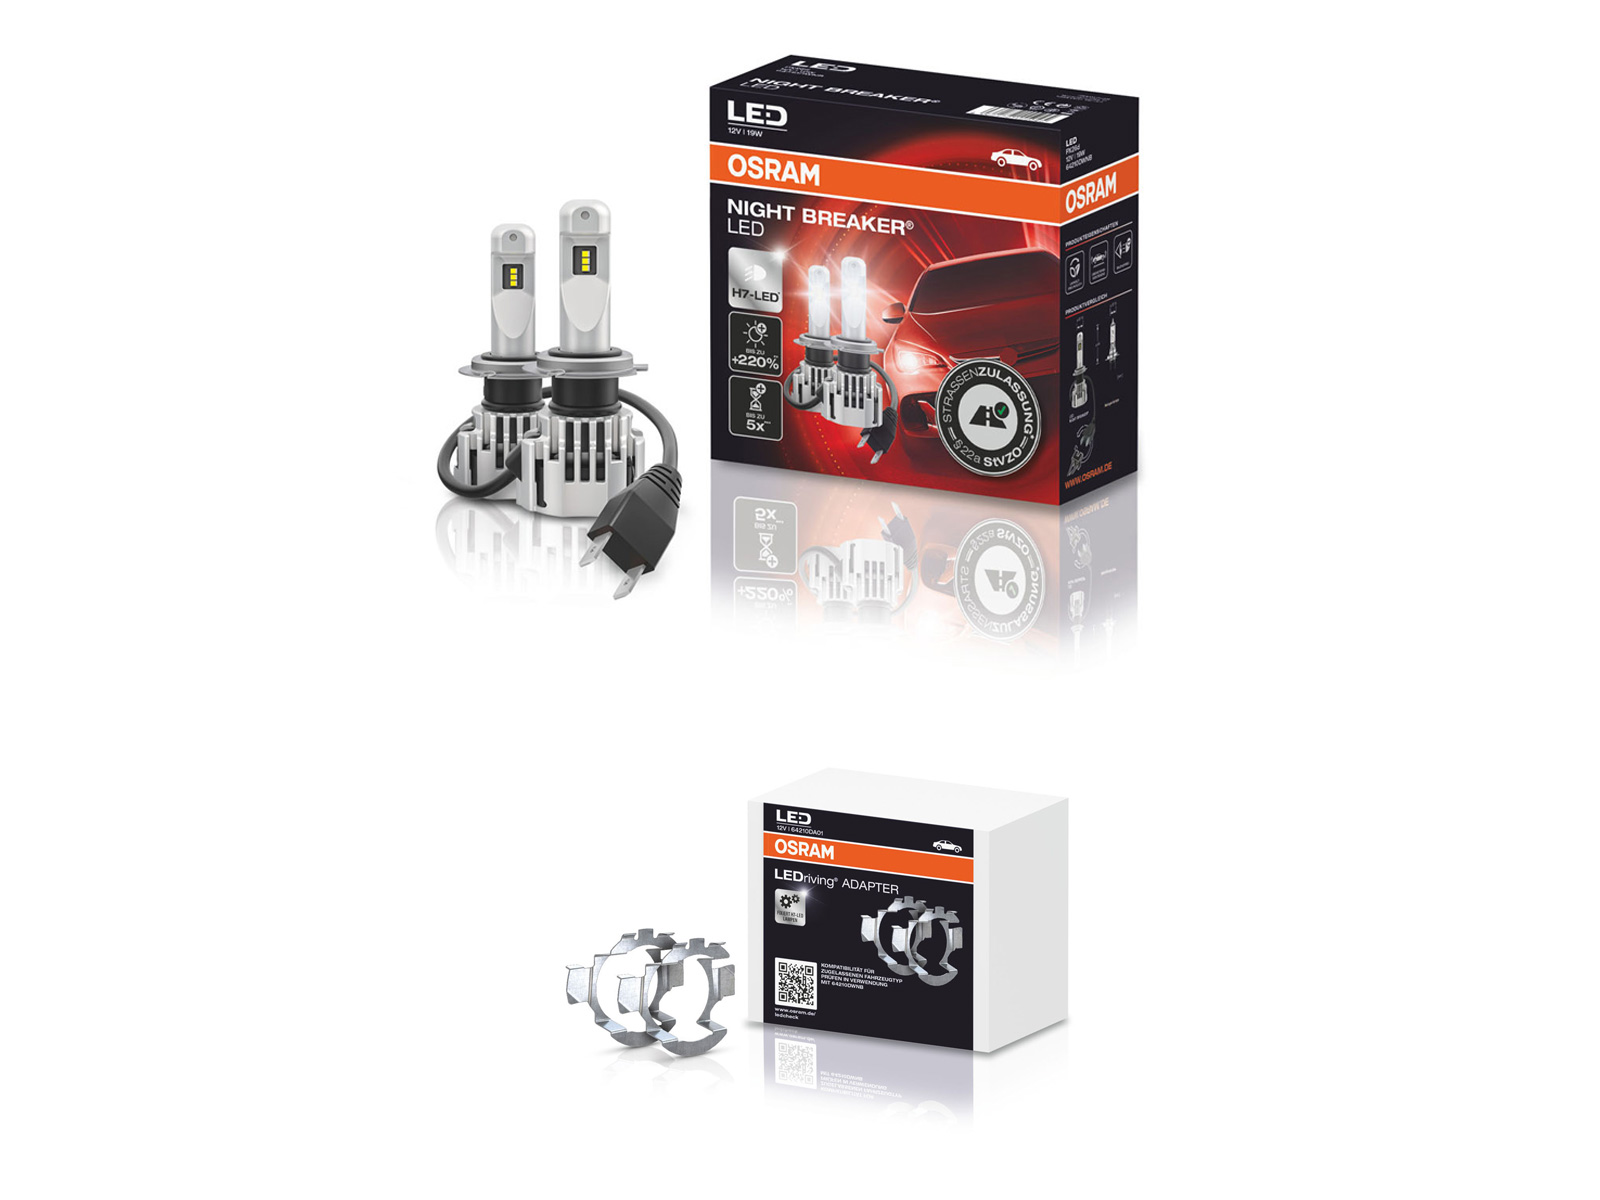 OSRAM H7 LED Night Breaker with Road Approval CHOICE: LEDs, Adapters or Sets eBay